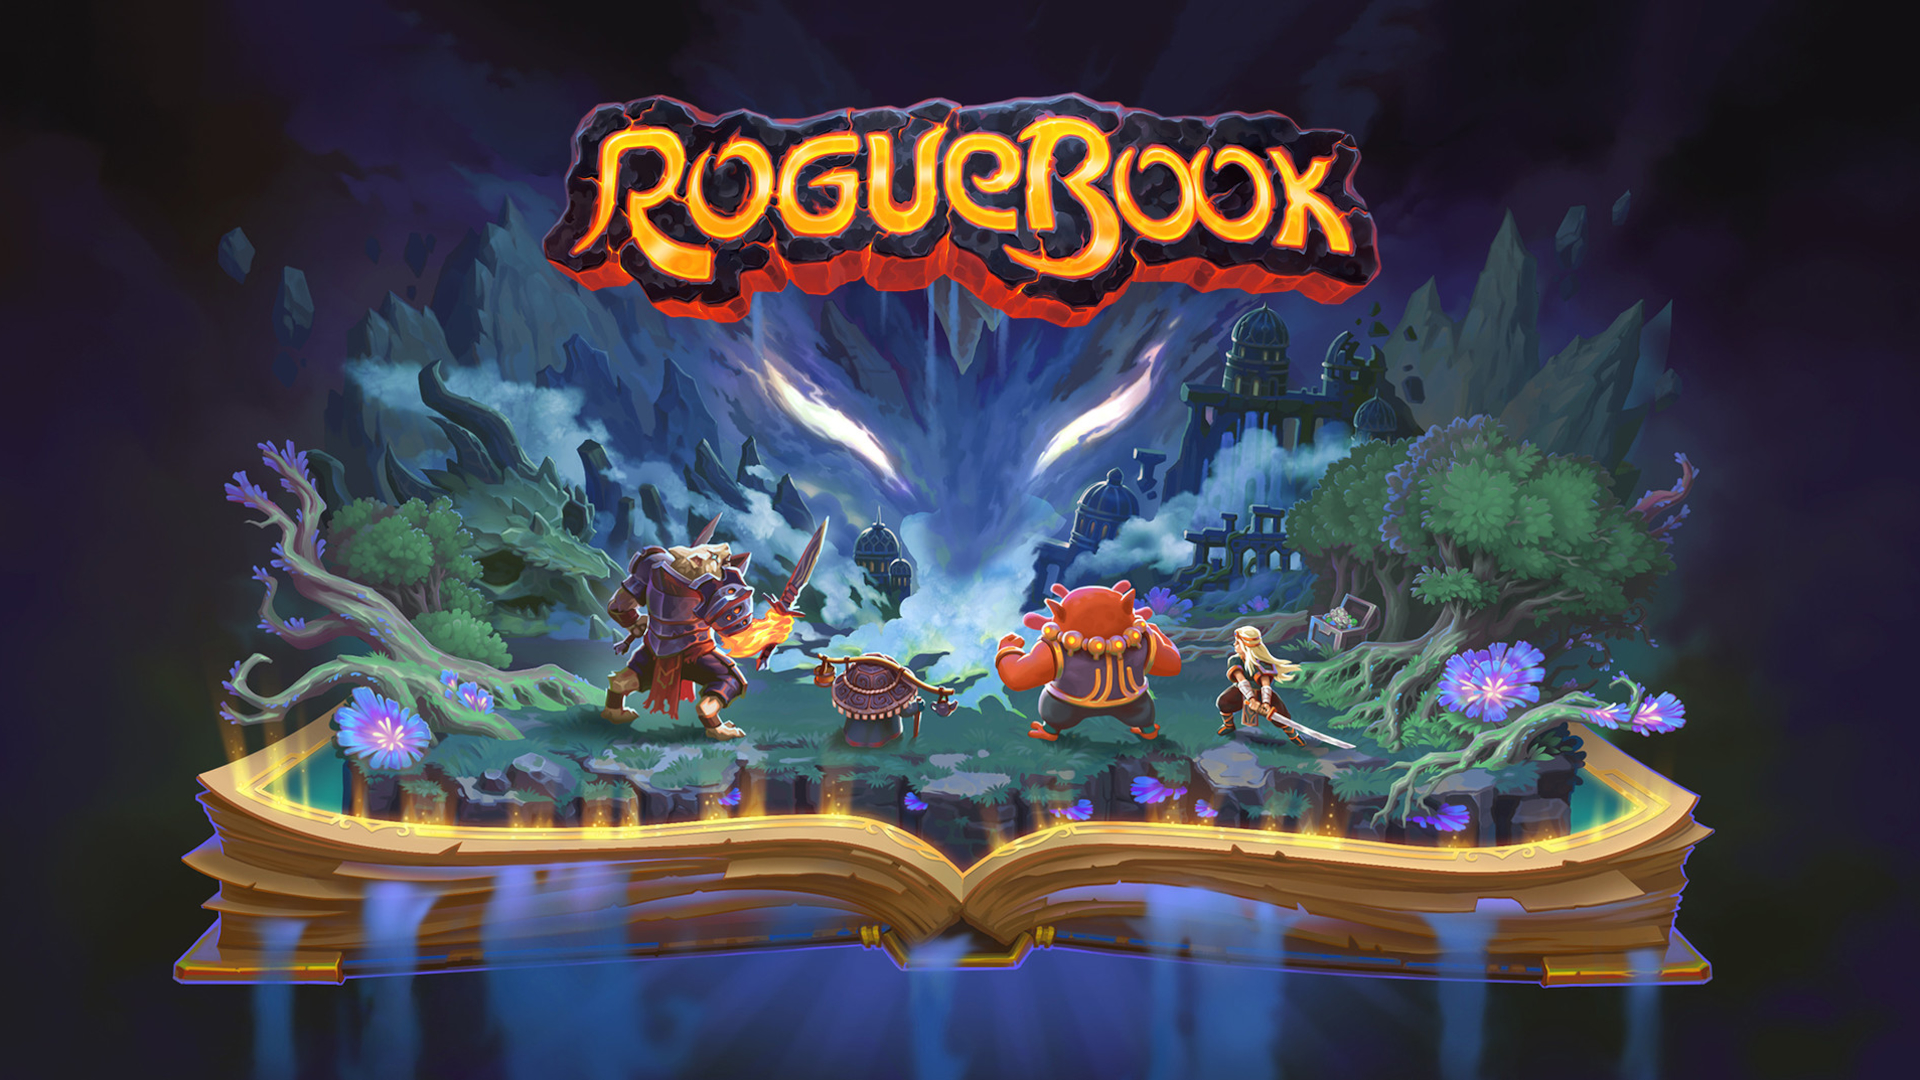 Video Game Roguebook HD Wallpaper | Background Image